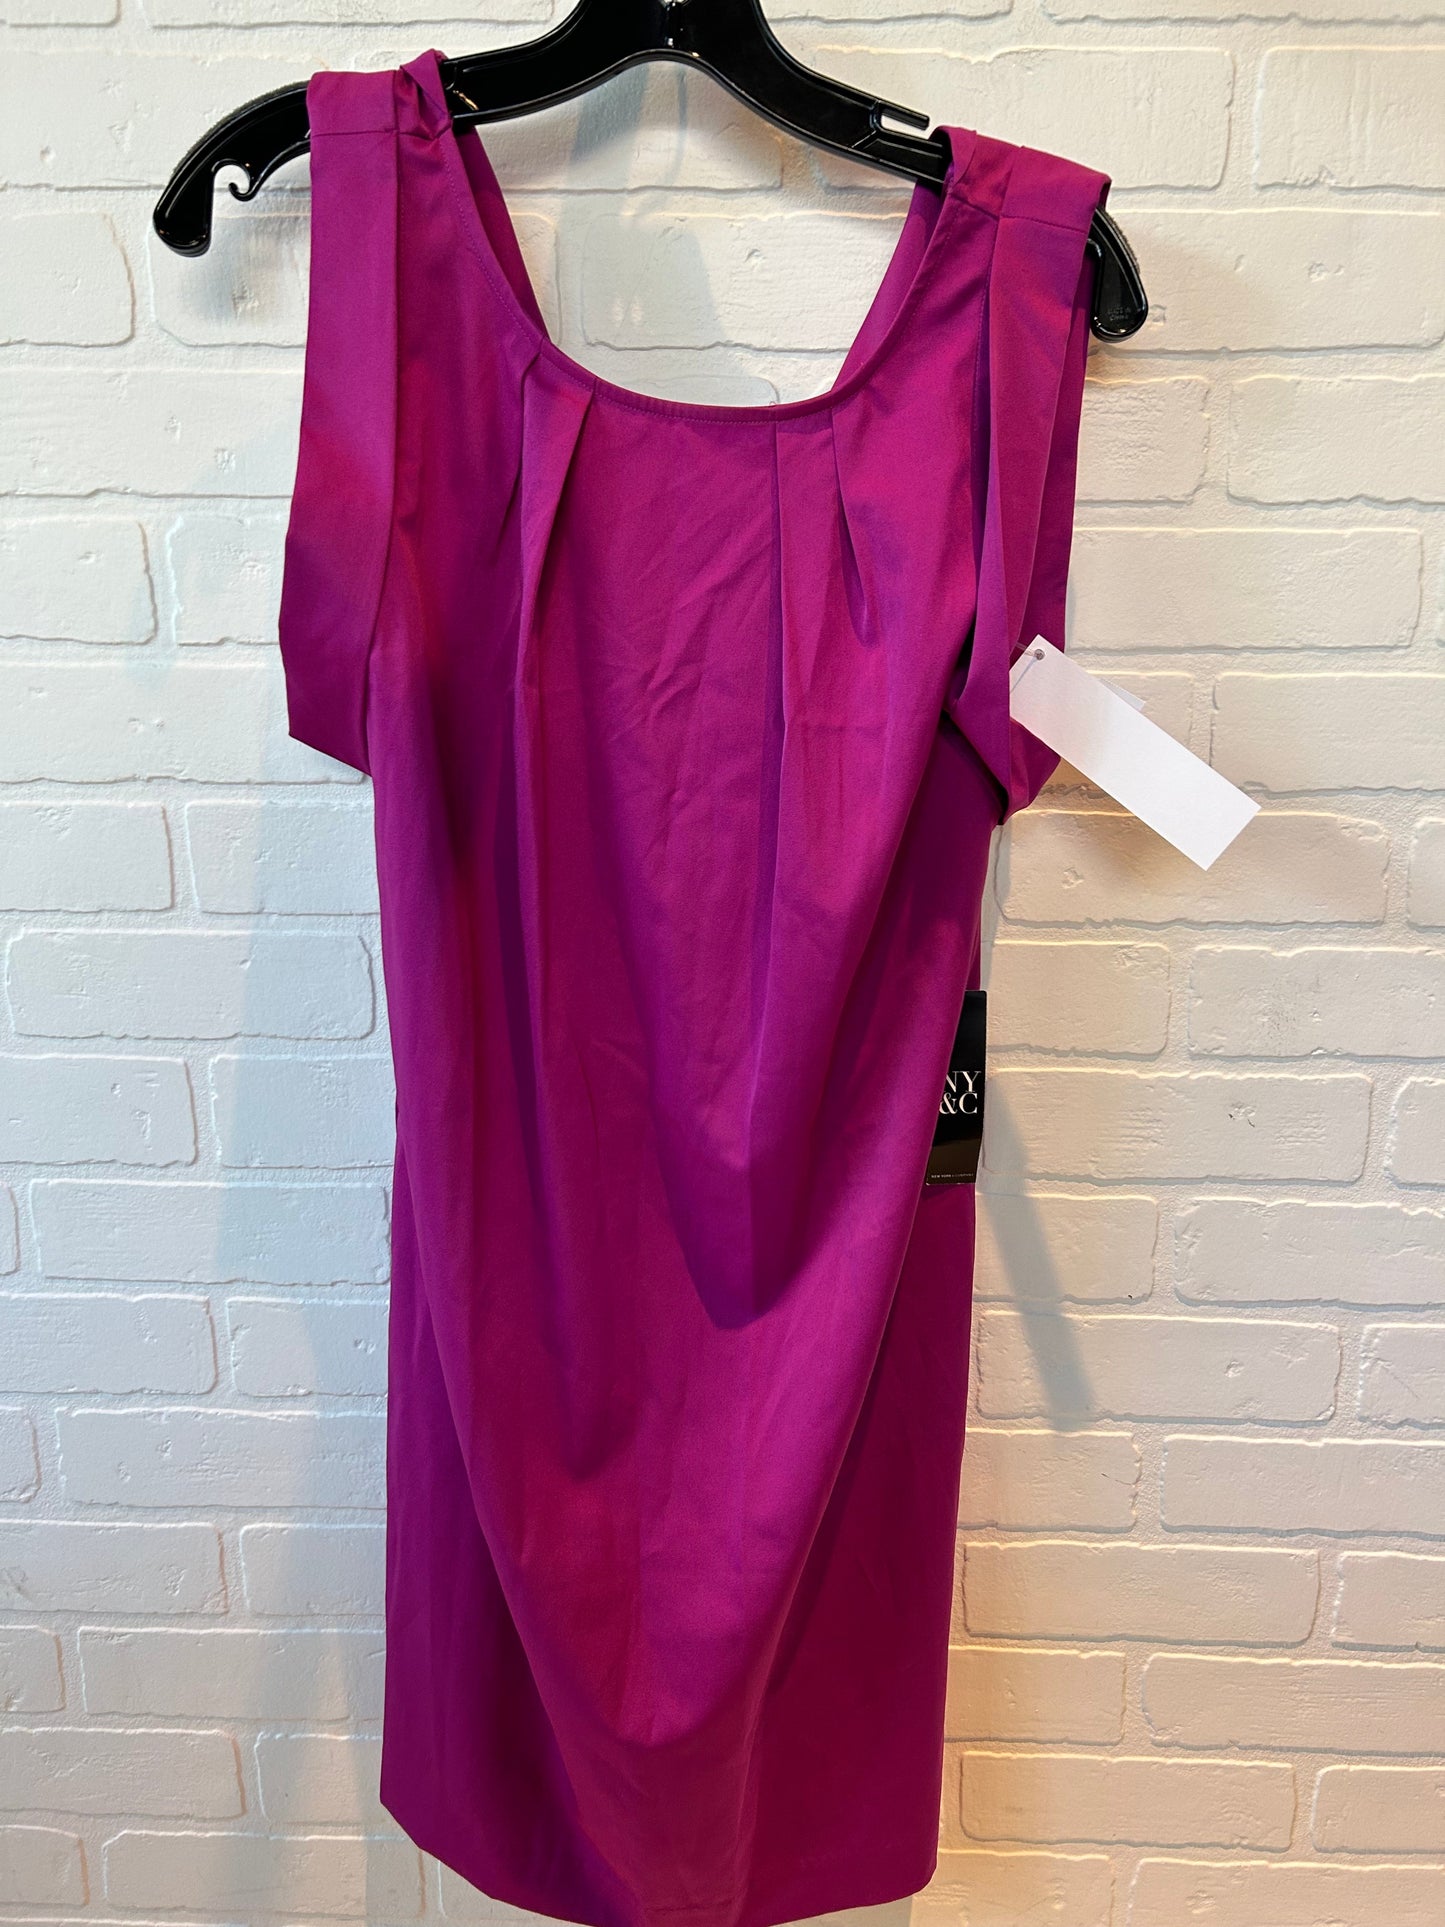 Pink Dress Work New York And Co, Size Xs